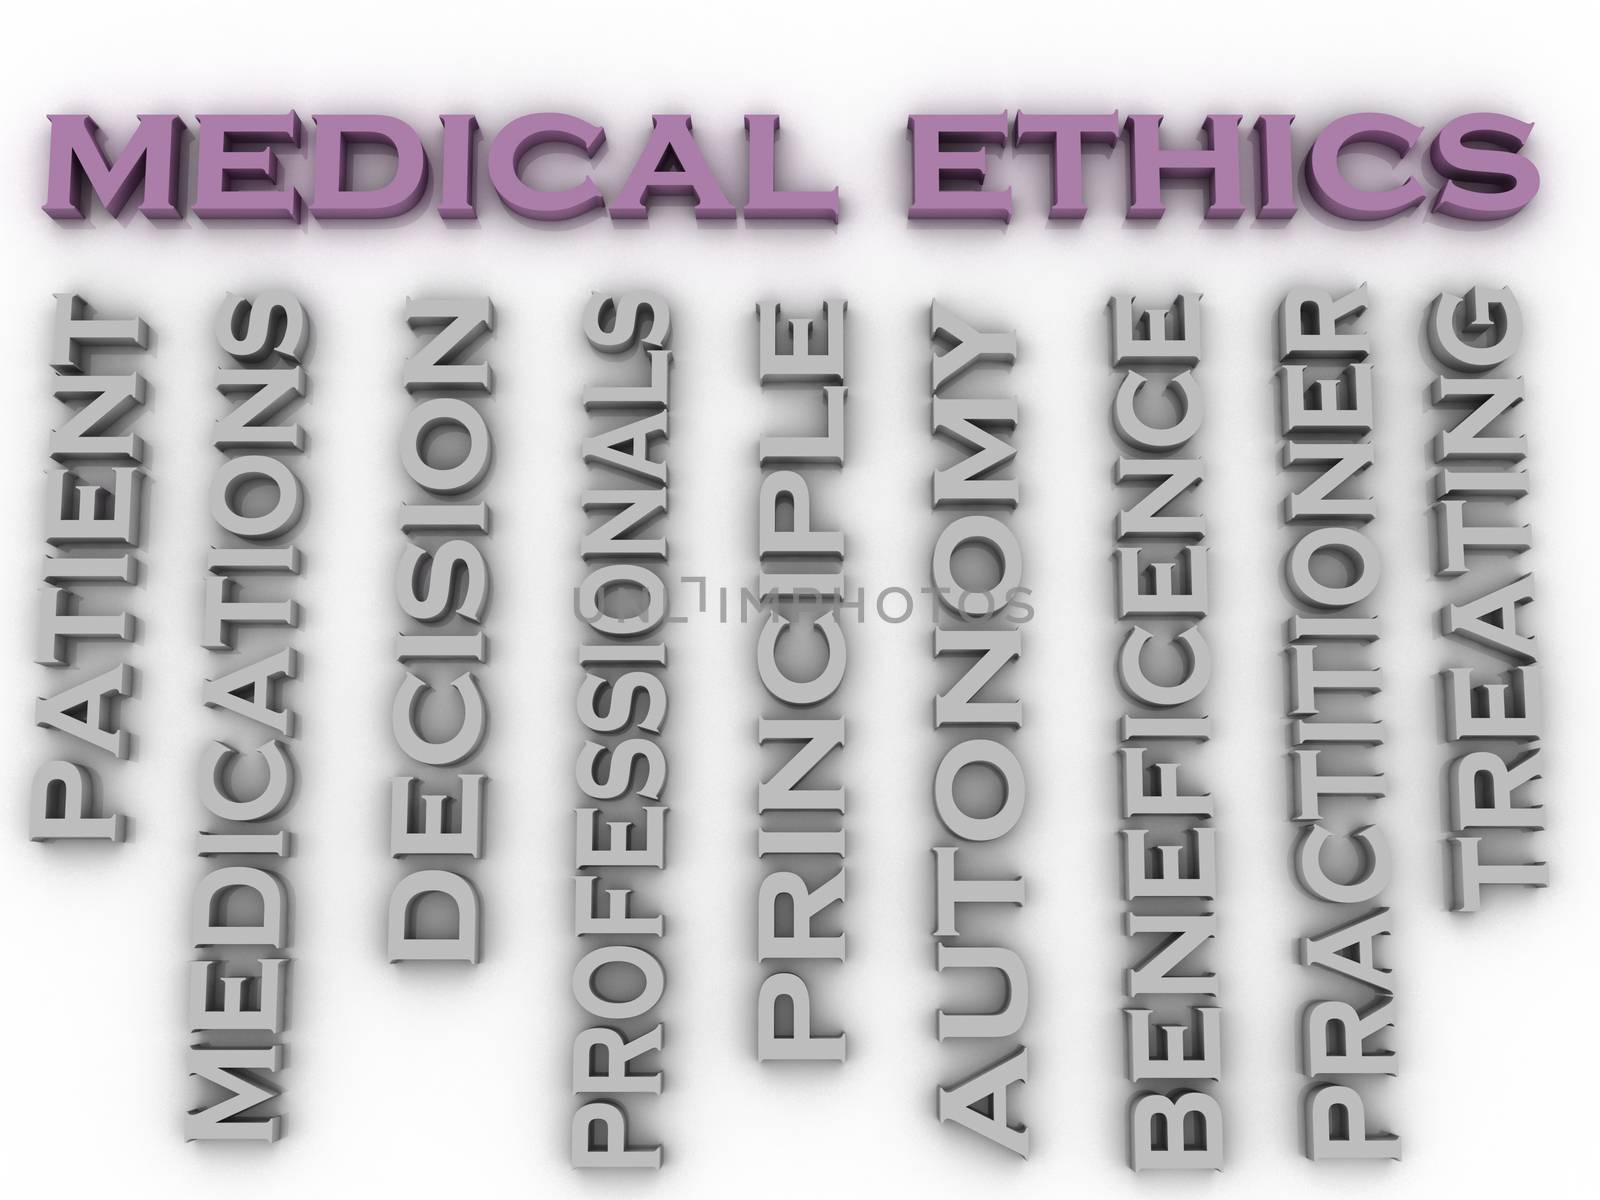 3d image medical ethics issues concept word cloud background by dacasdo